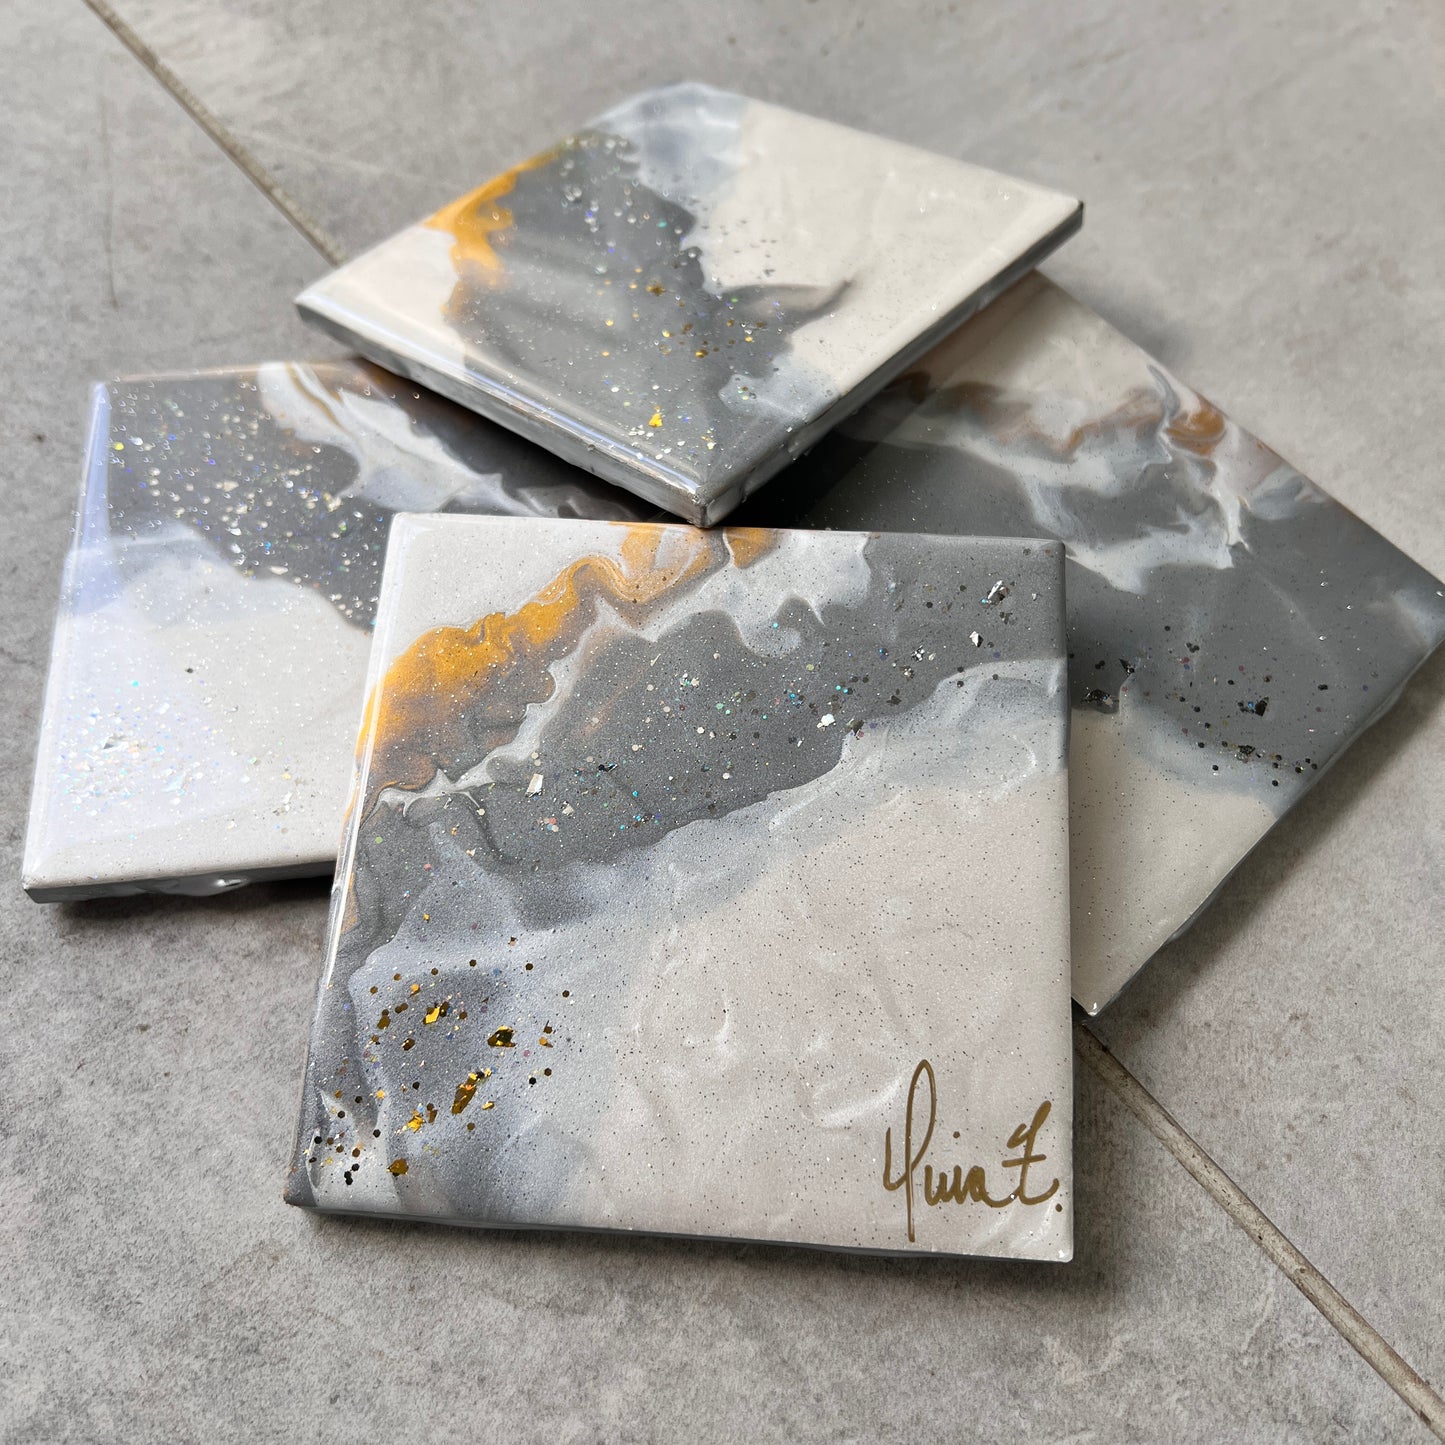 4 pc coasters in white, grey, gold